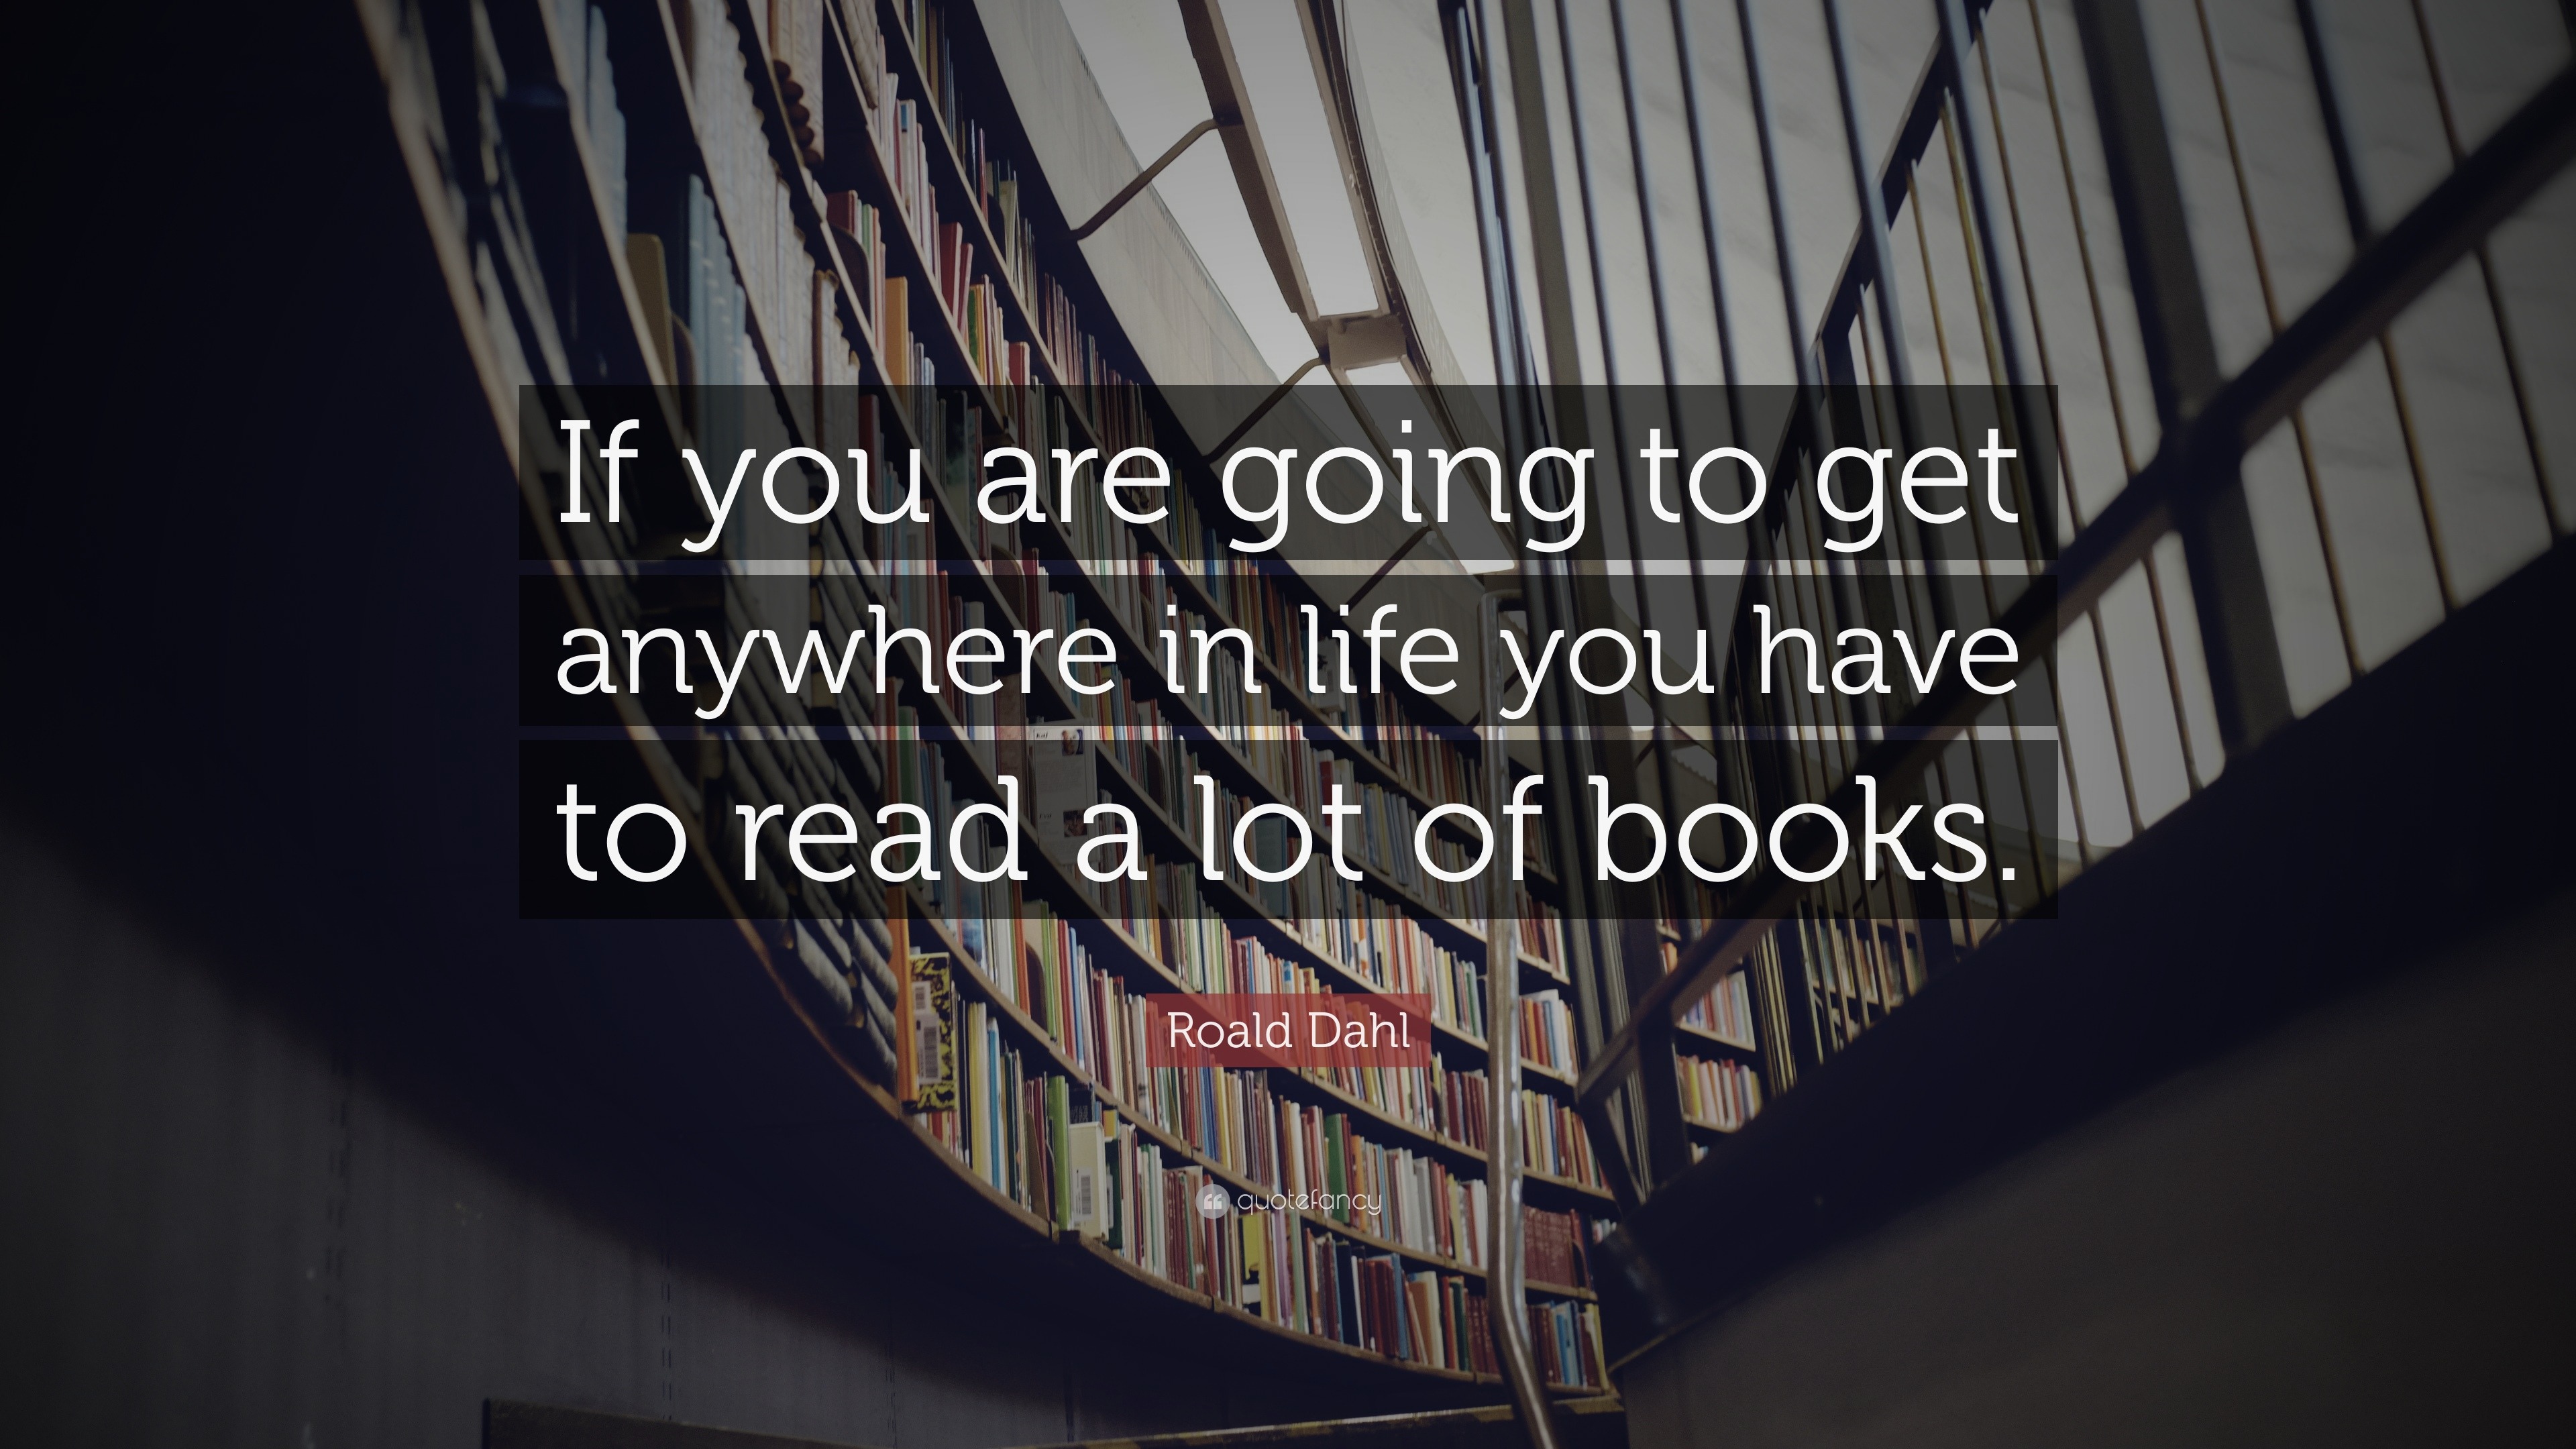 Roald Dahl Quote: “If you are going to get anywhere in life you have to